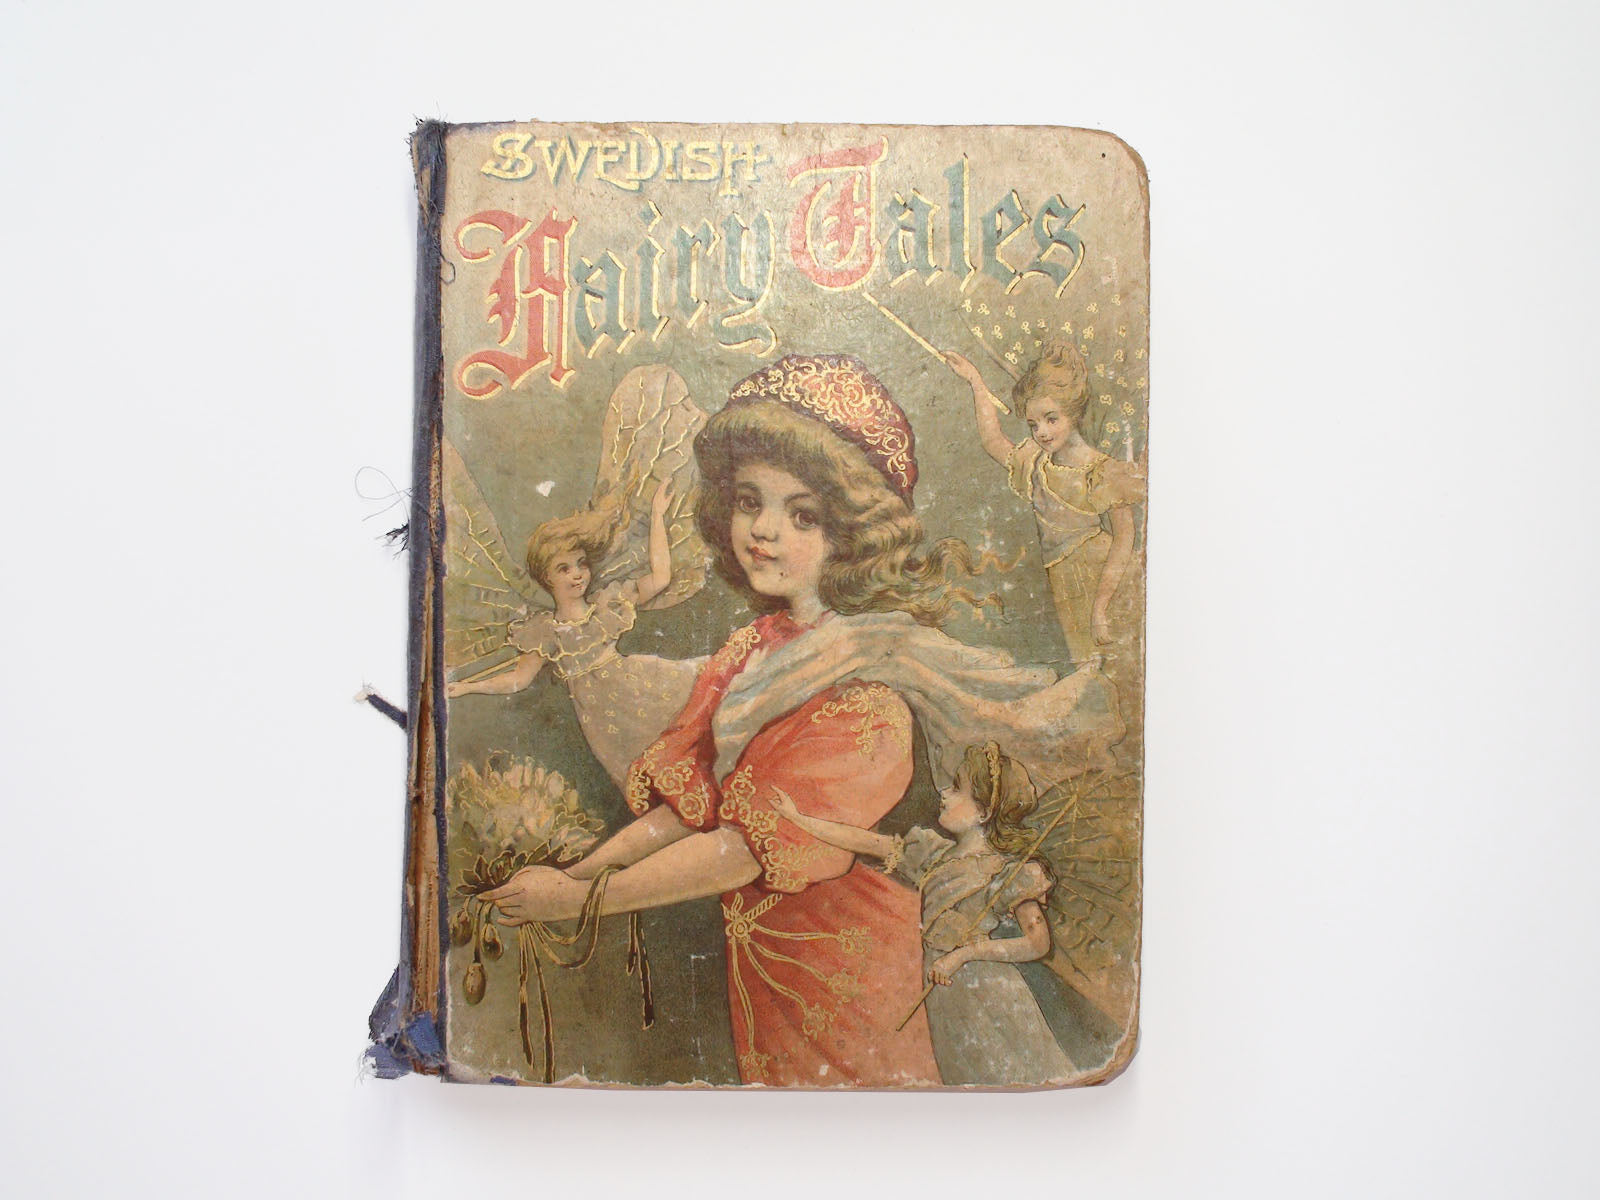 Swedish Fairy Tales by Herman Hofbero, Translated by Meyers, Illustrated, 1908